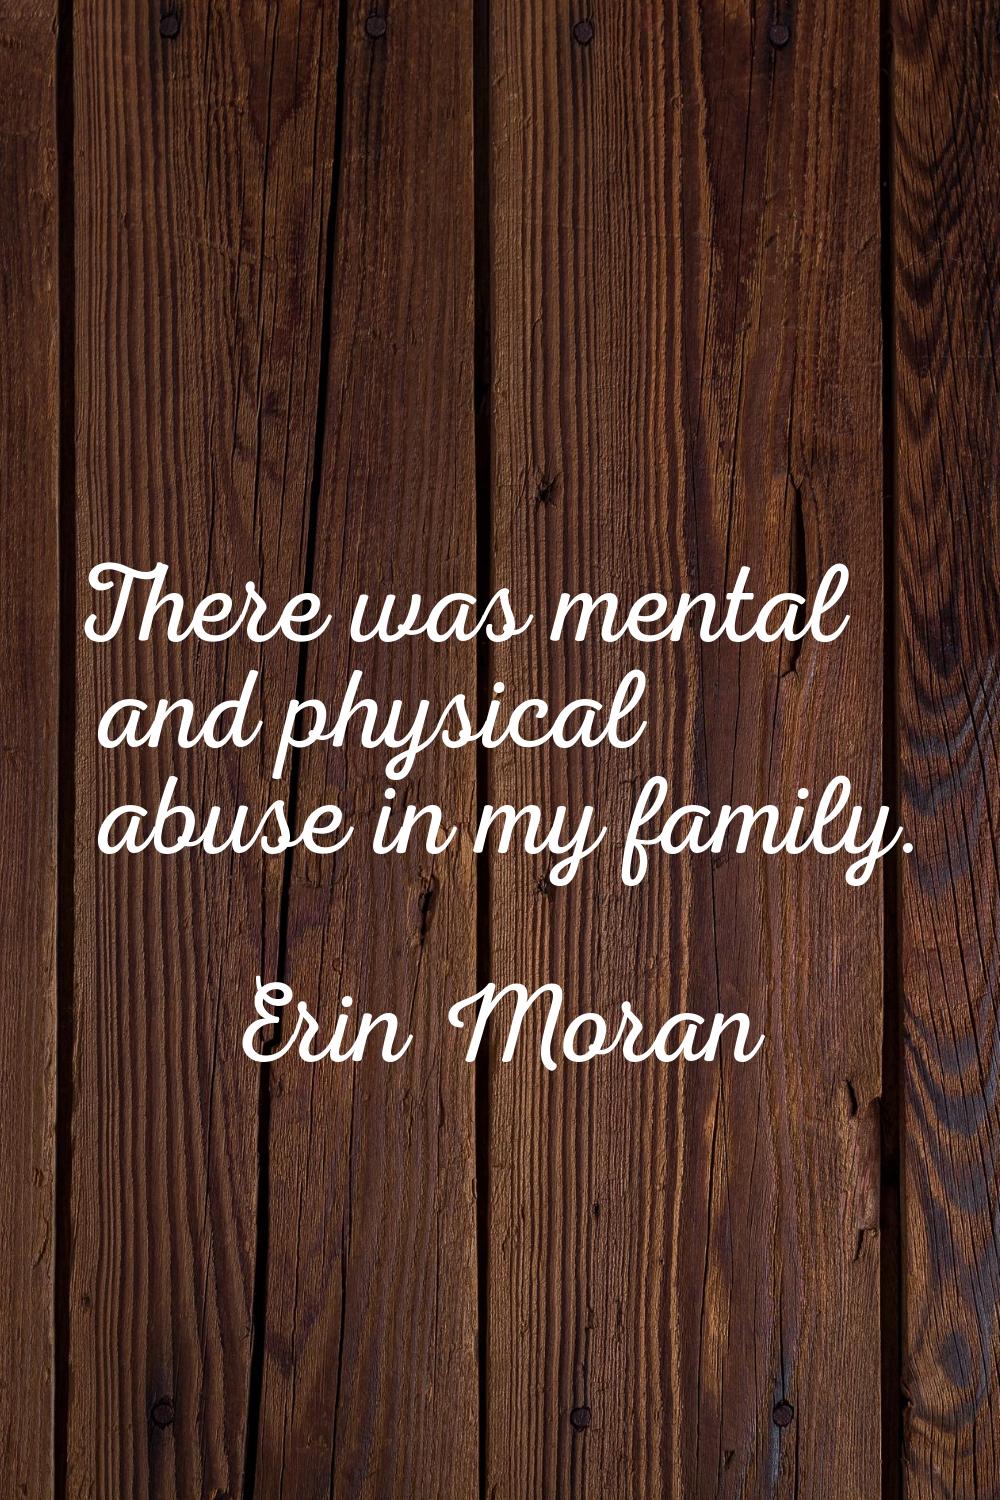 There was mental and physical abuse in my family.